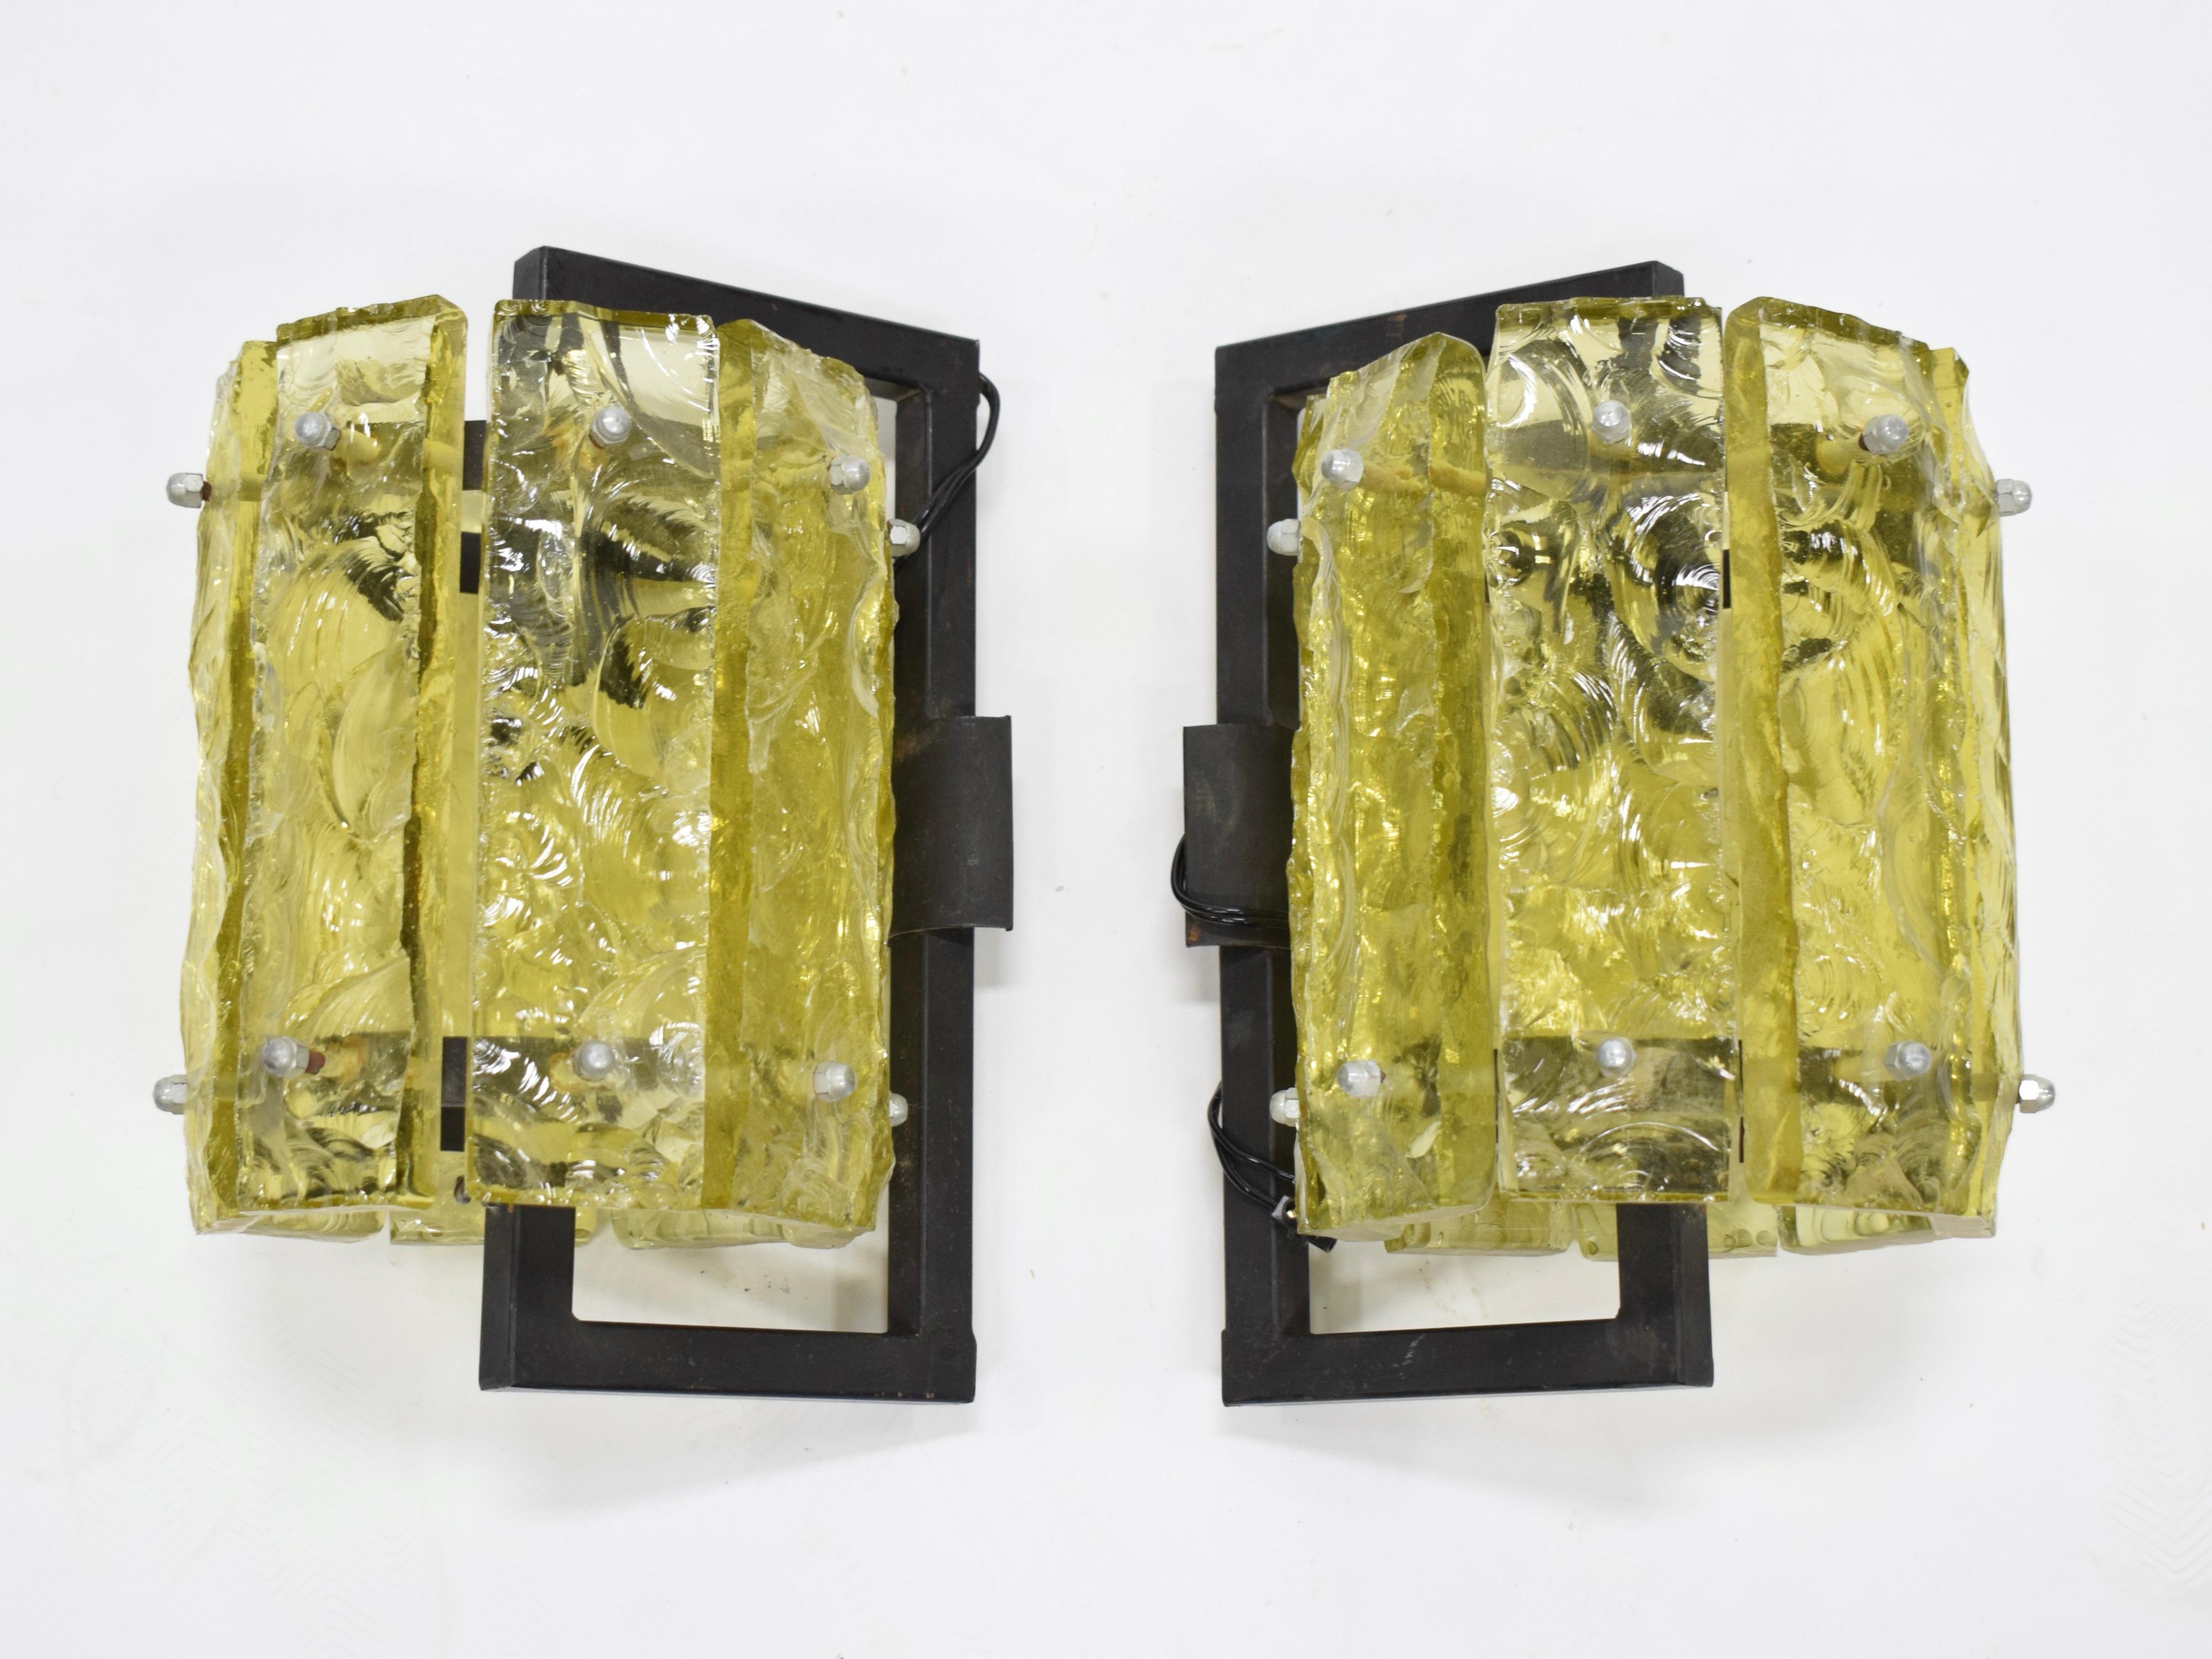 Midcentury sconces featuring wavy yellow glass and black metal frames. Newly rewired for US electrical. 